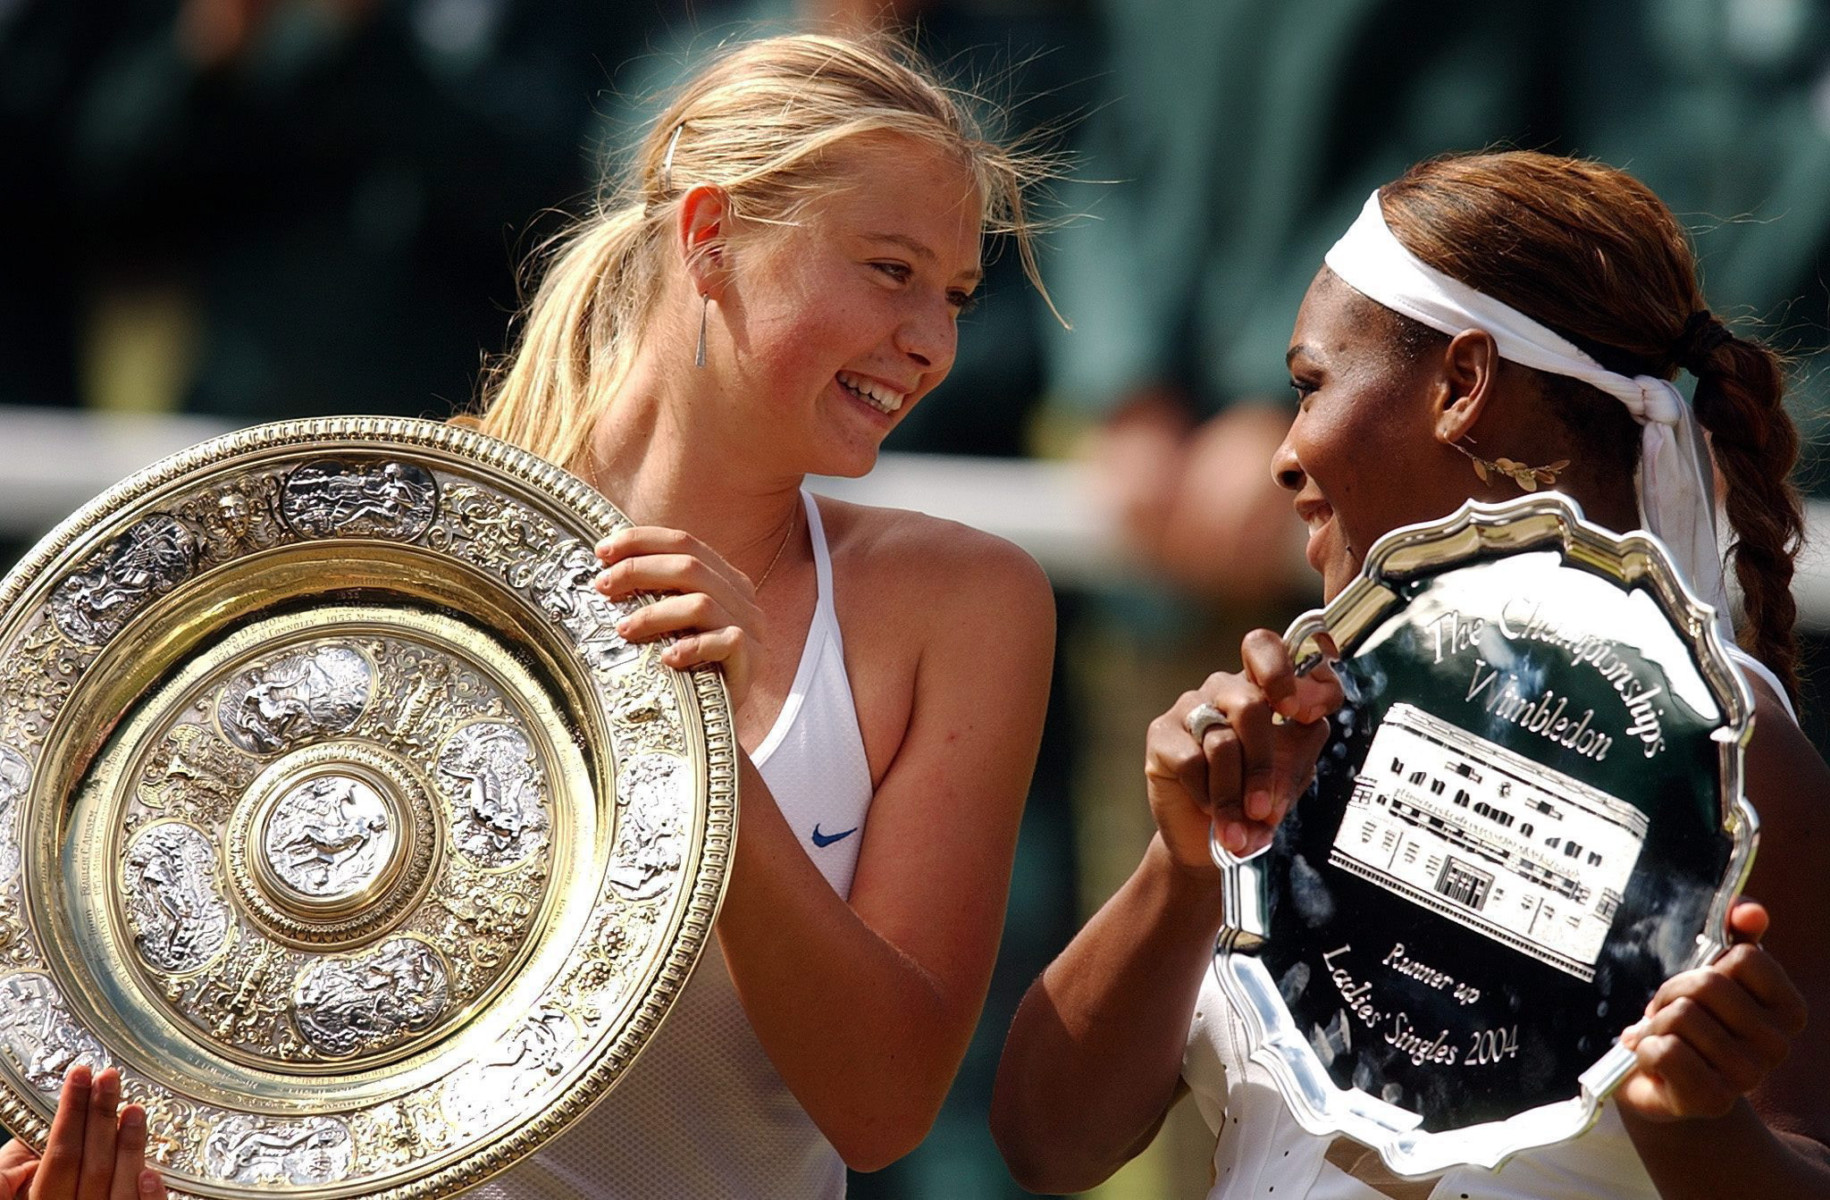 She became a household name in 2004 when she beat Serena Williams to win Wimbledon